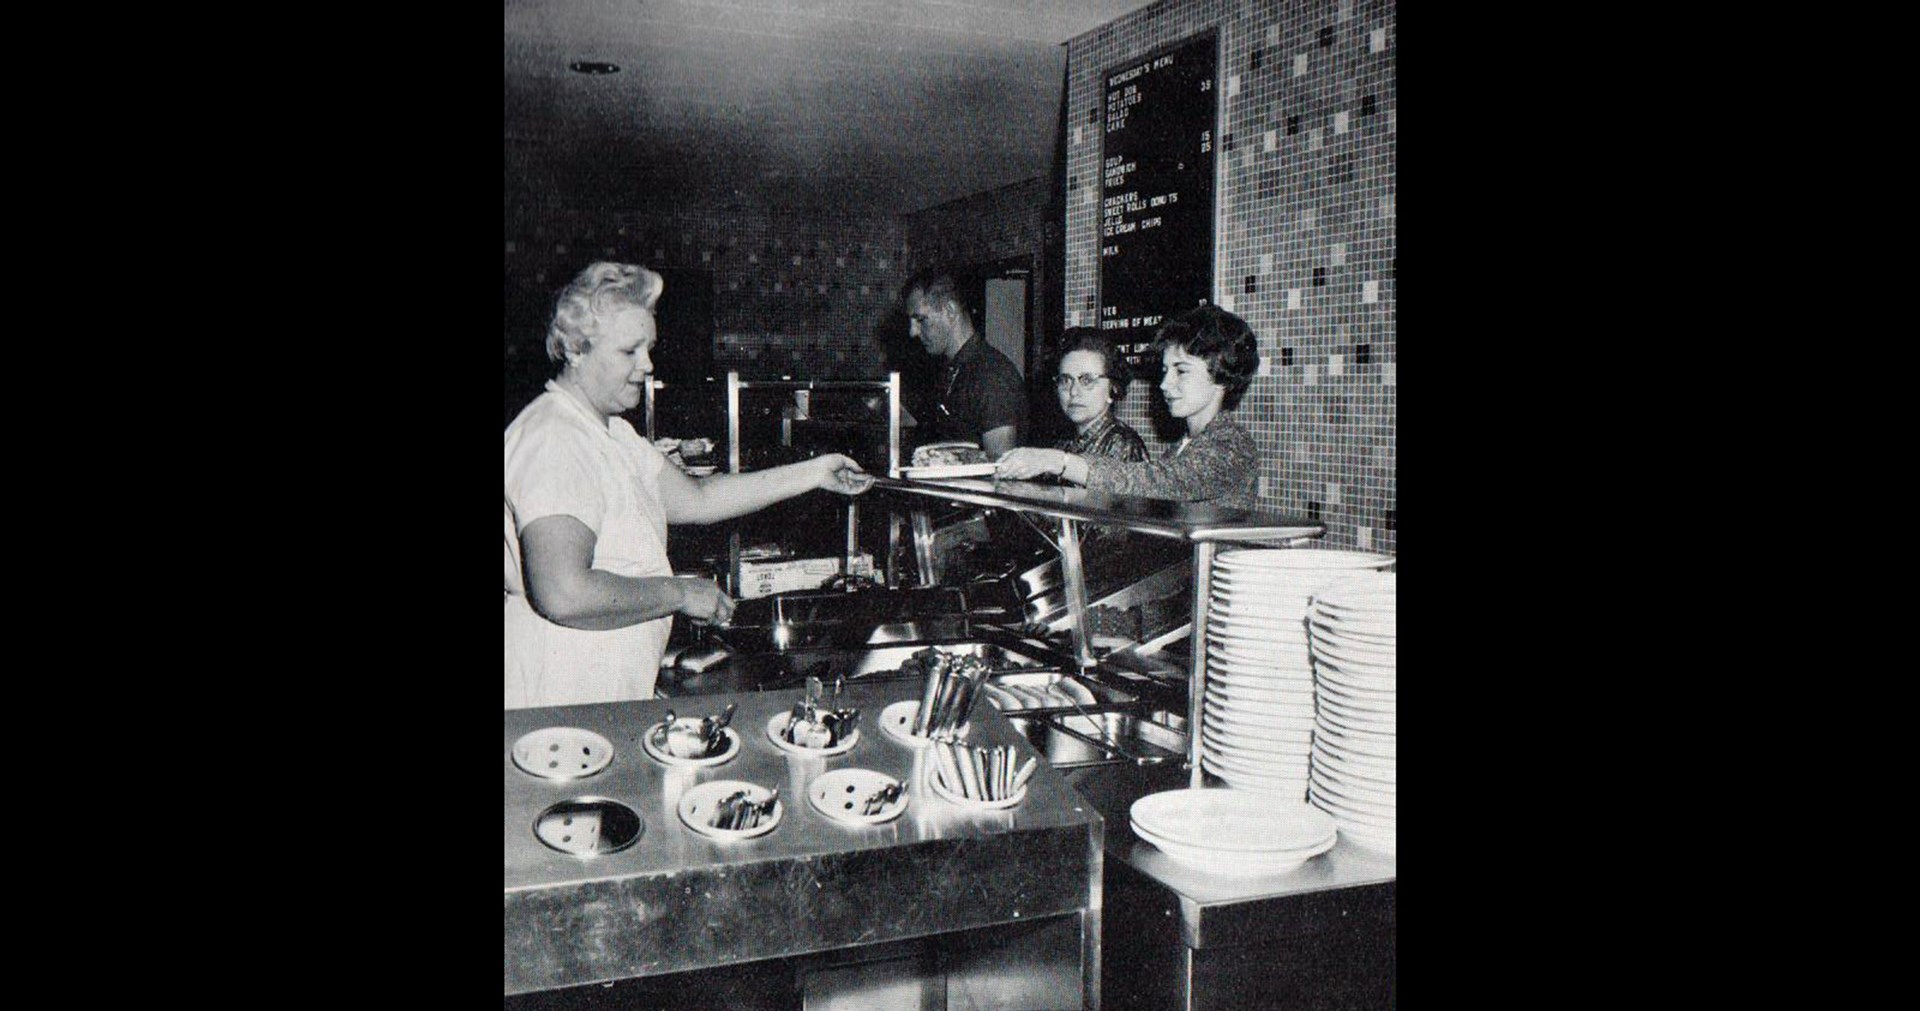 The MHS food service space in 1962